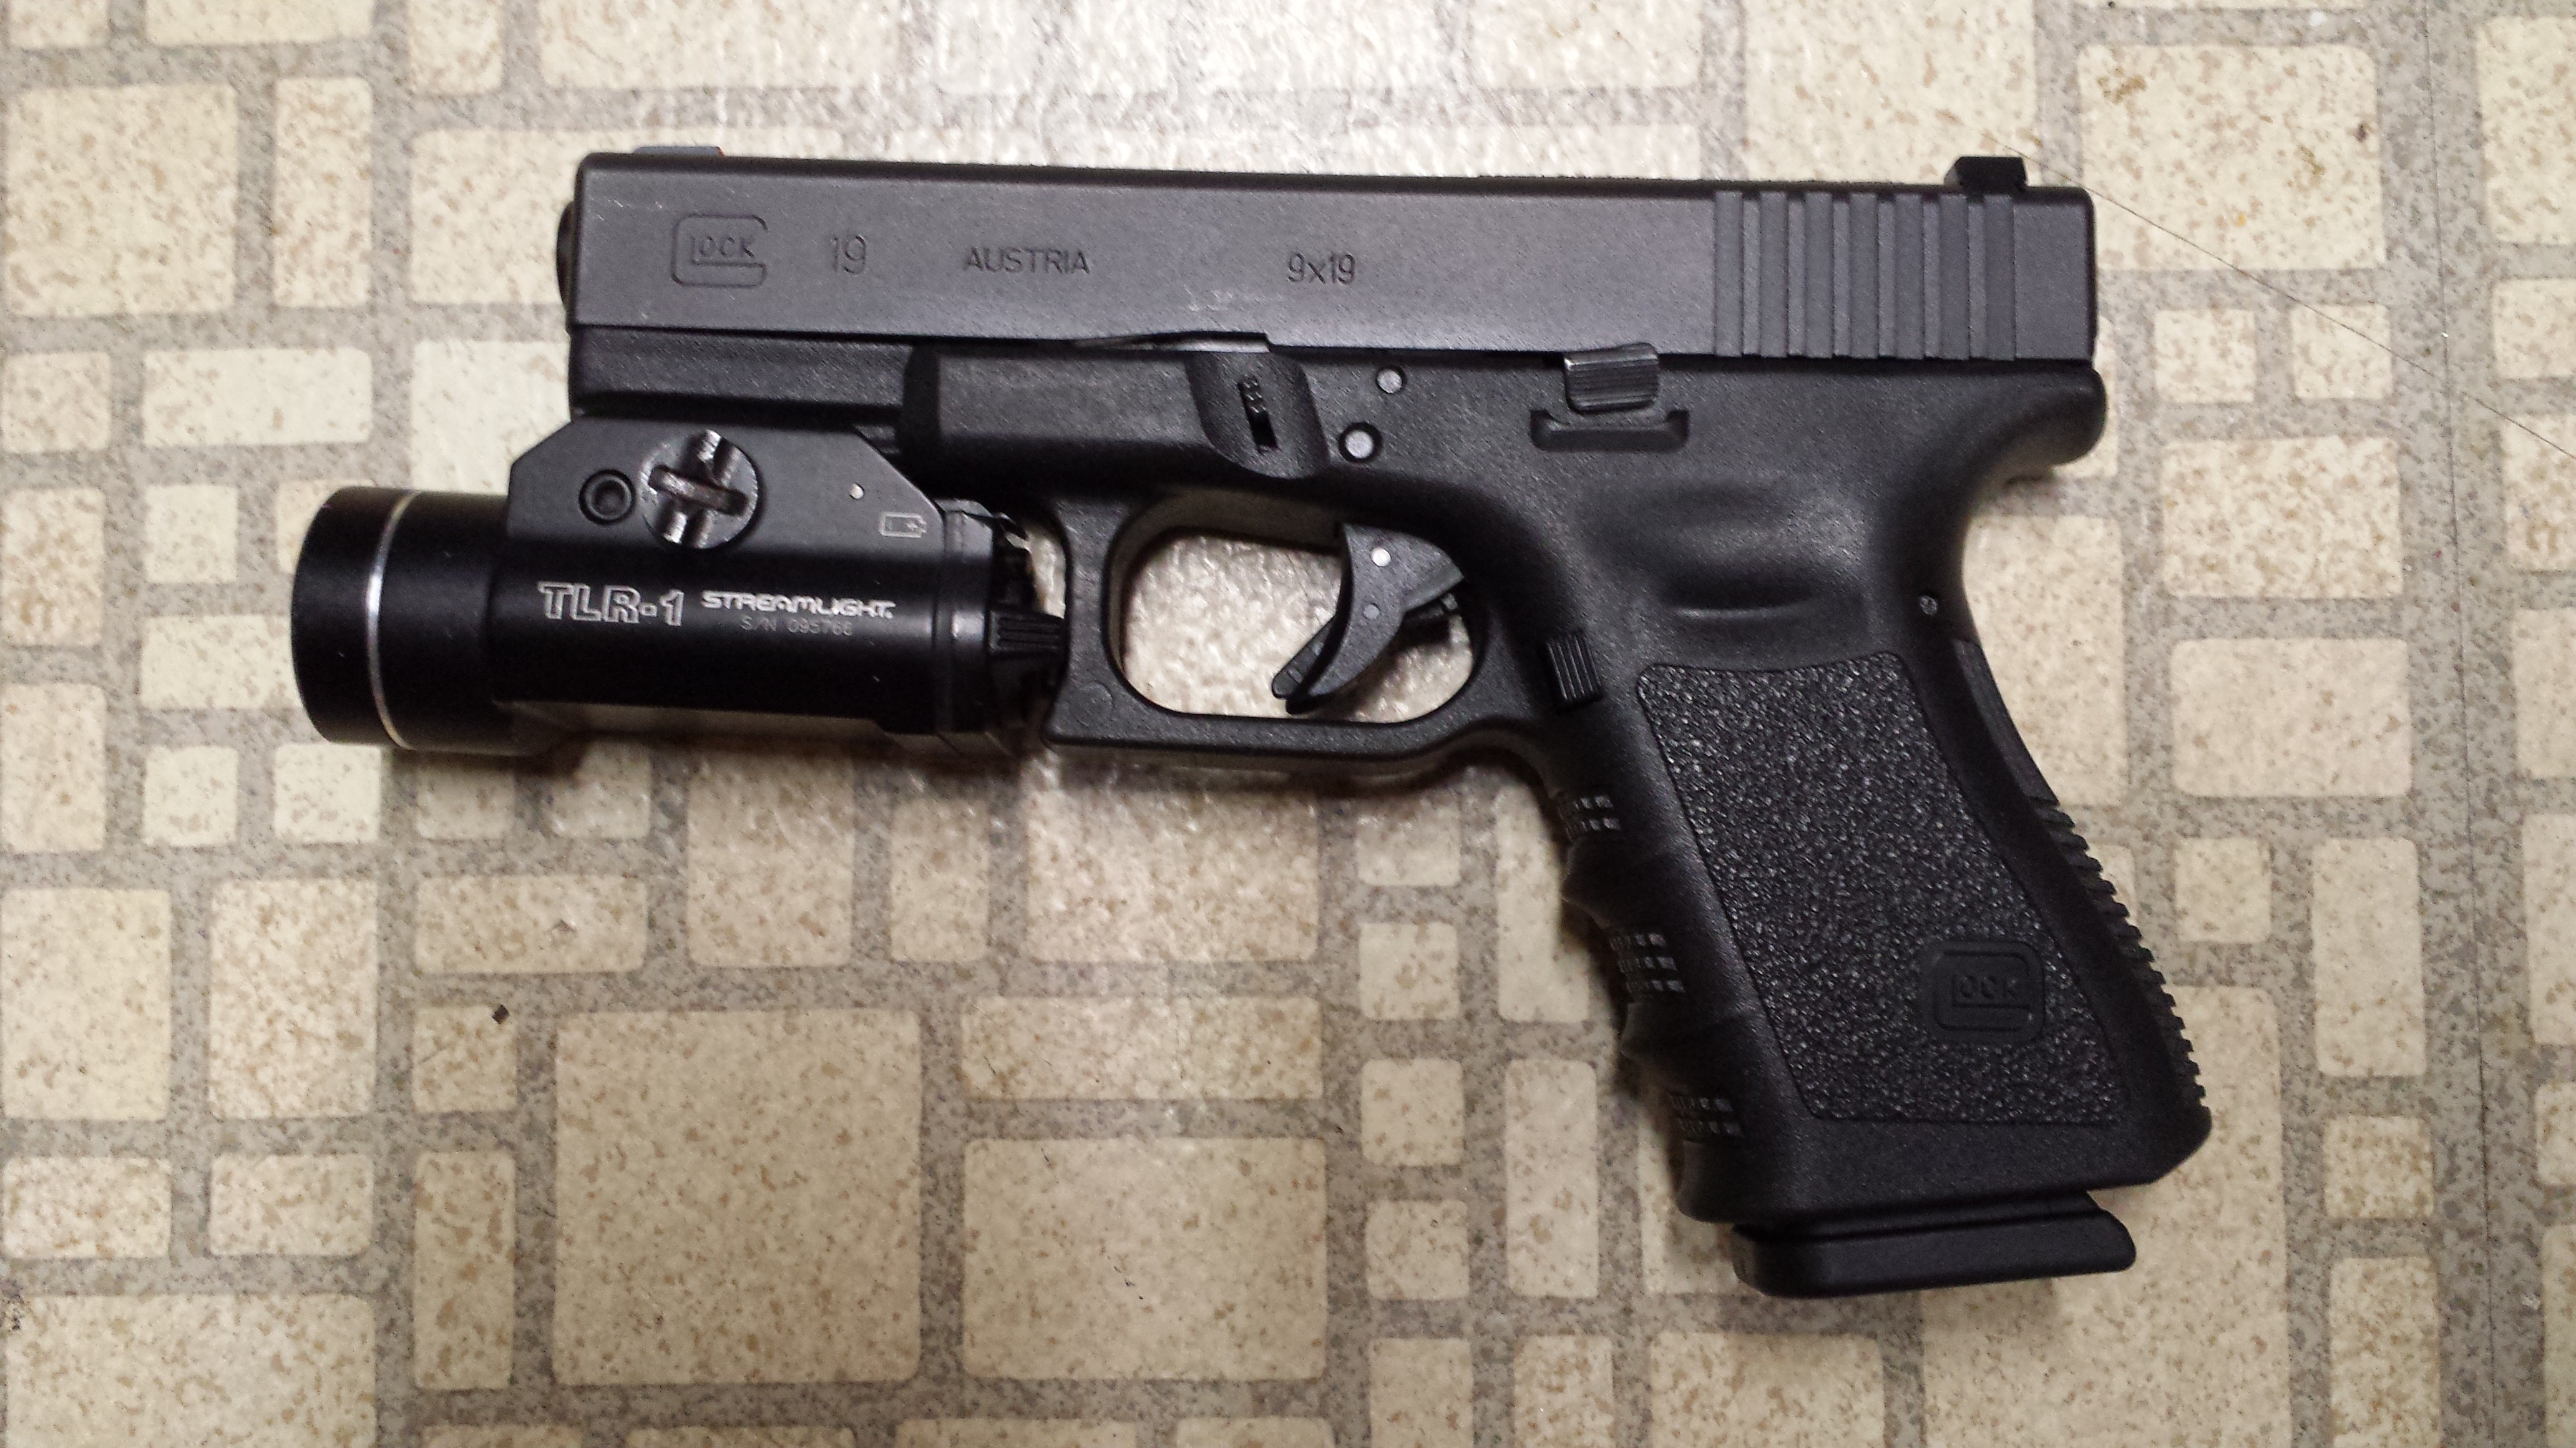 Glock 19 with Streamlight TLR-1.